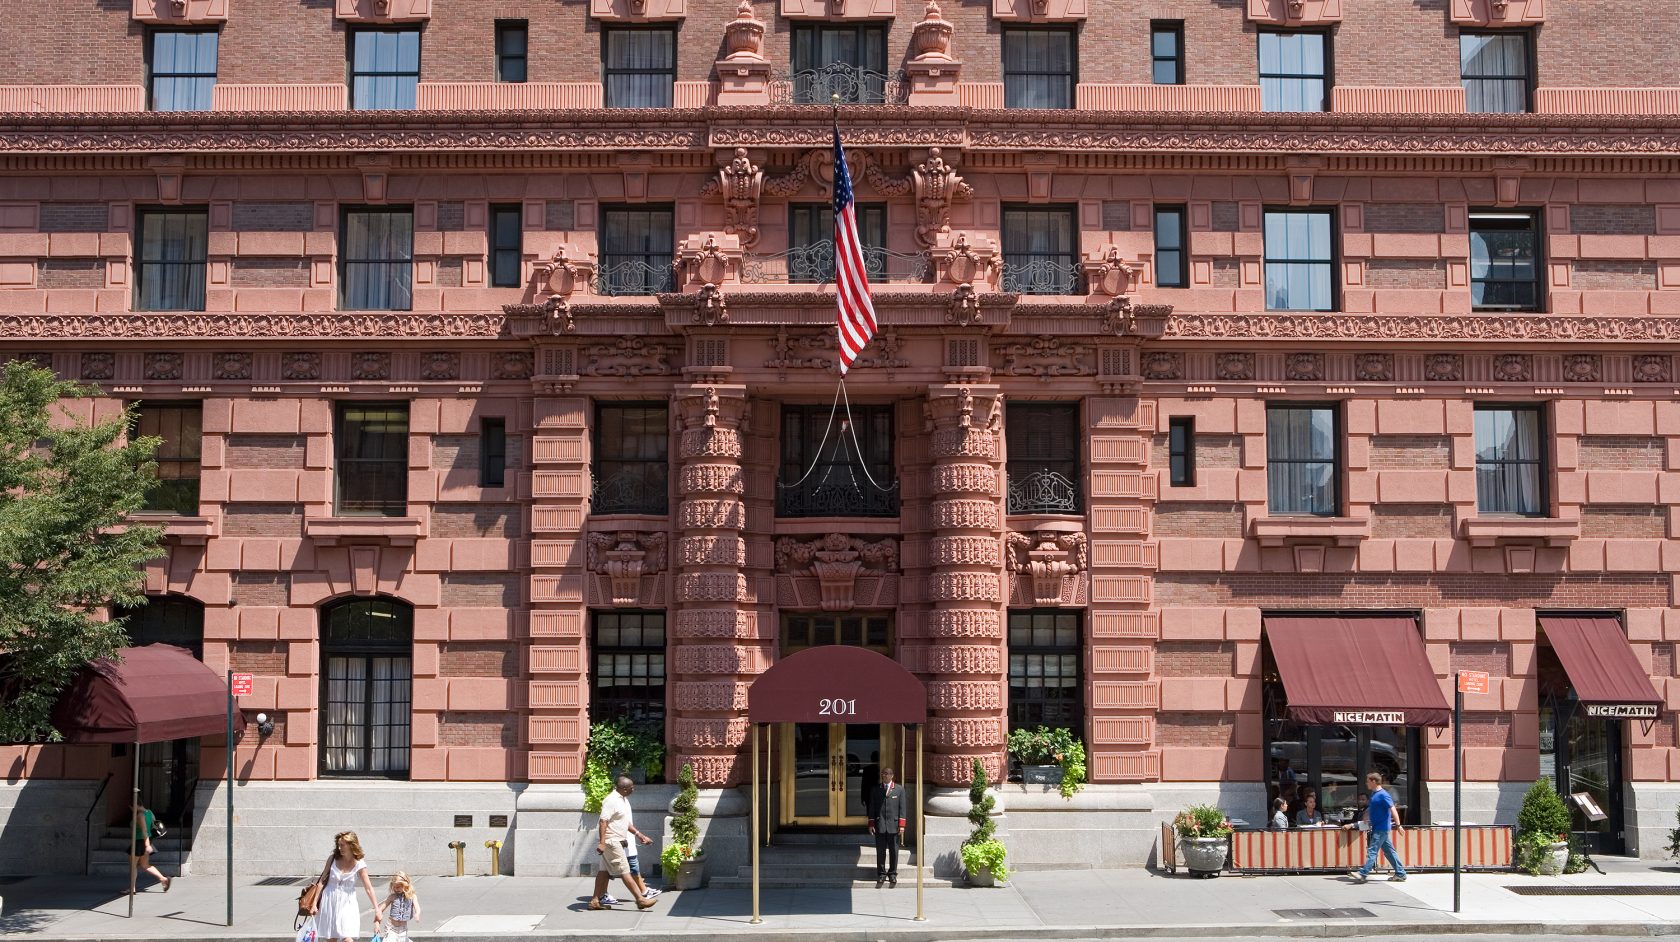 Image of the Lucerne Hotel in NYC